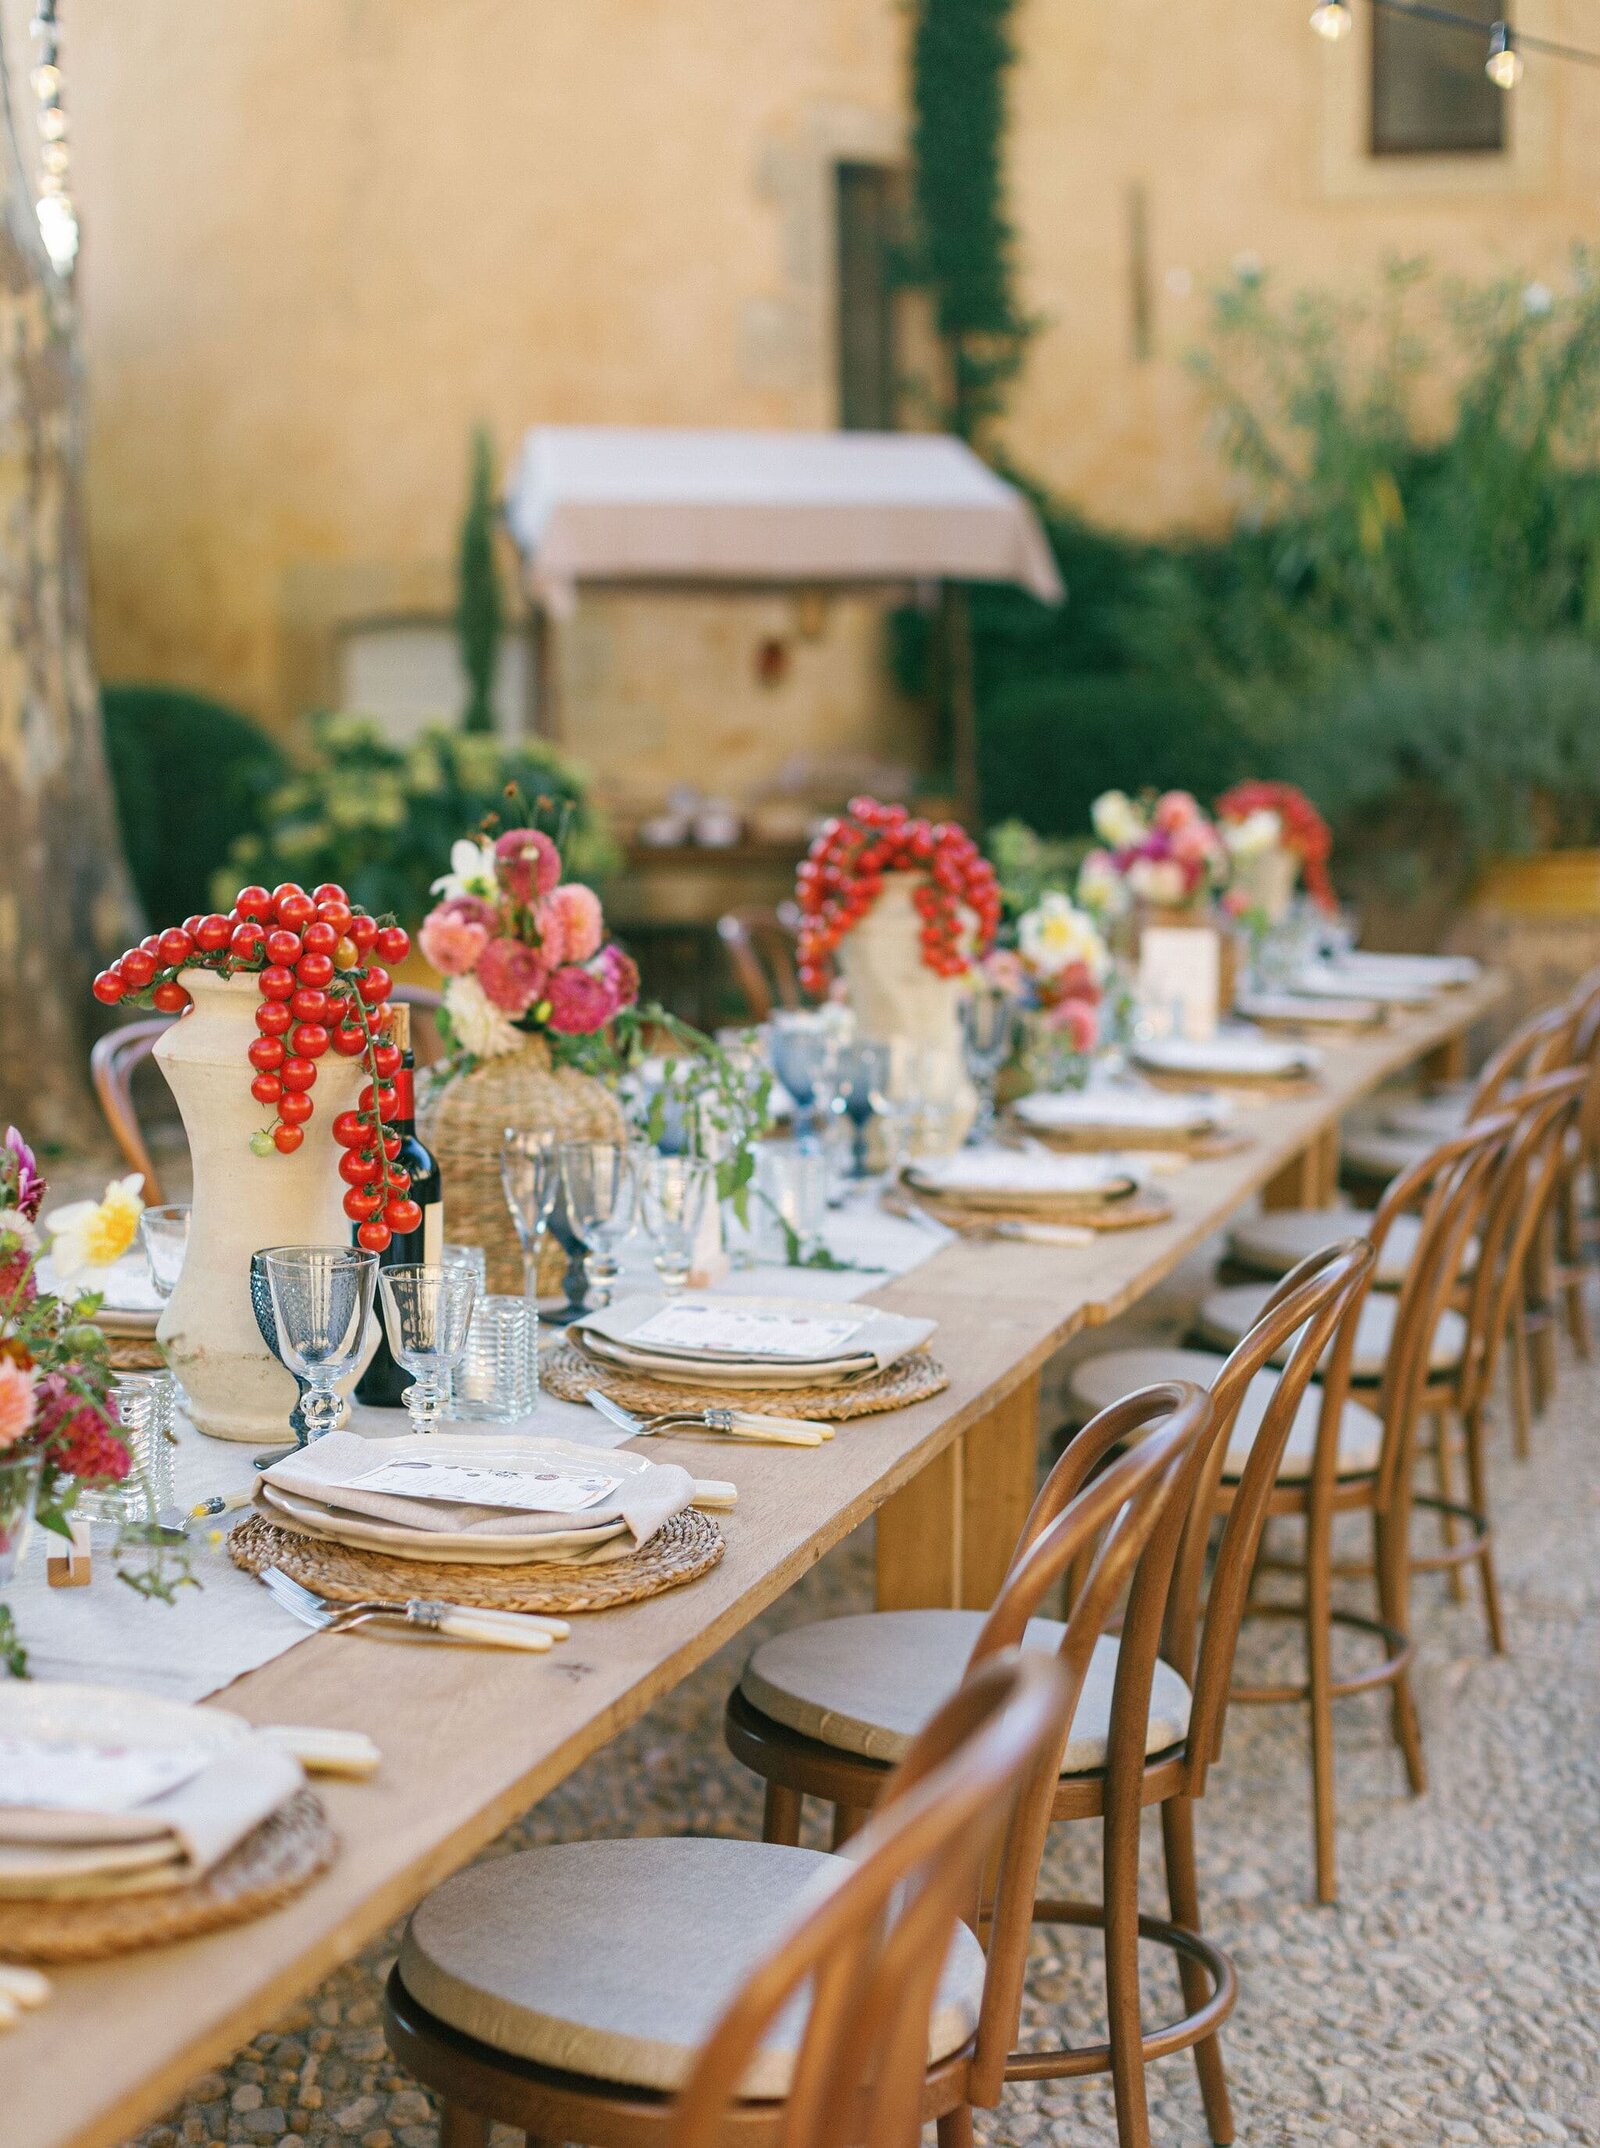 Courtyard-dinner-provence-wooden-tables